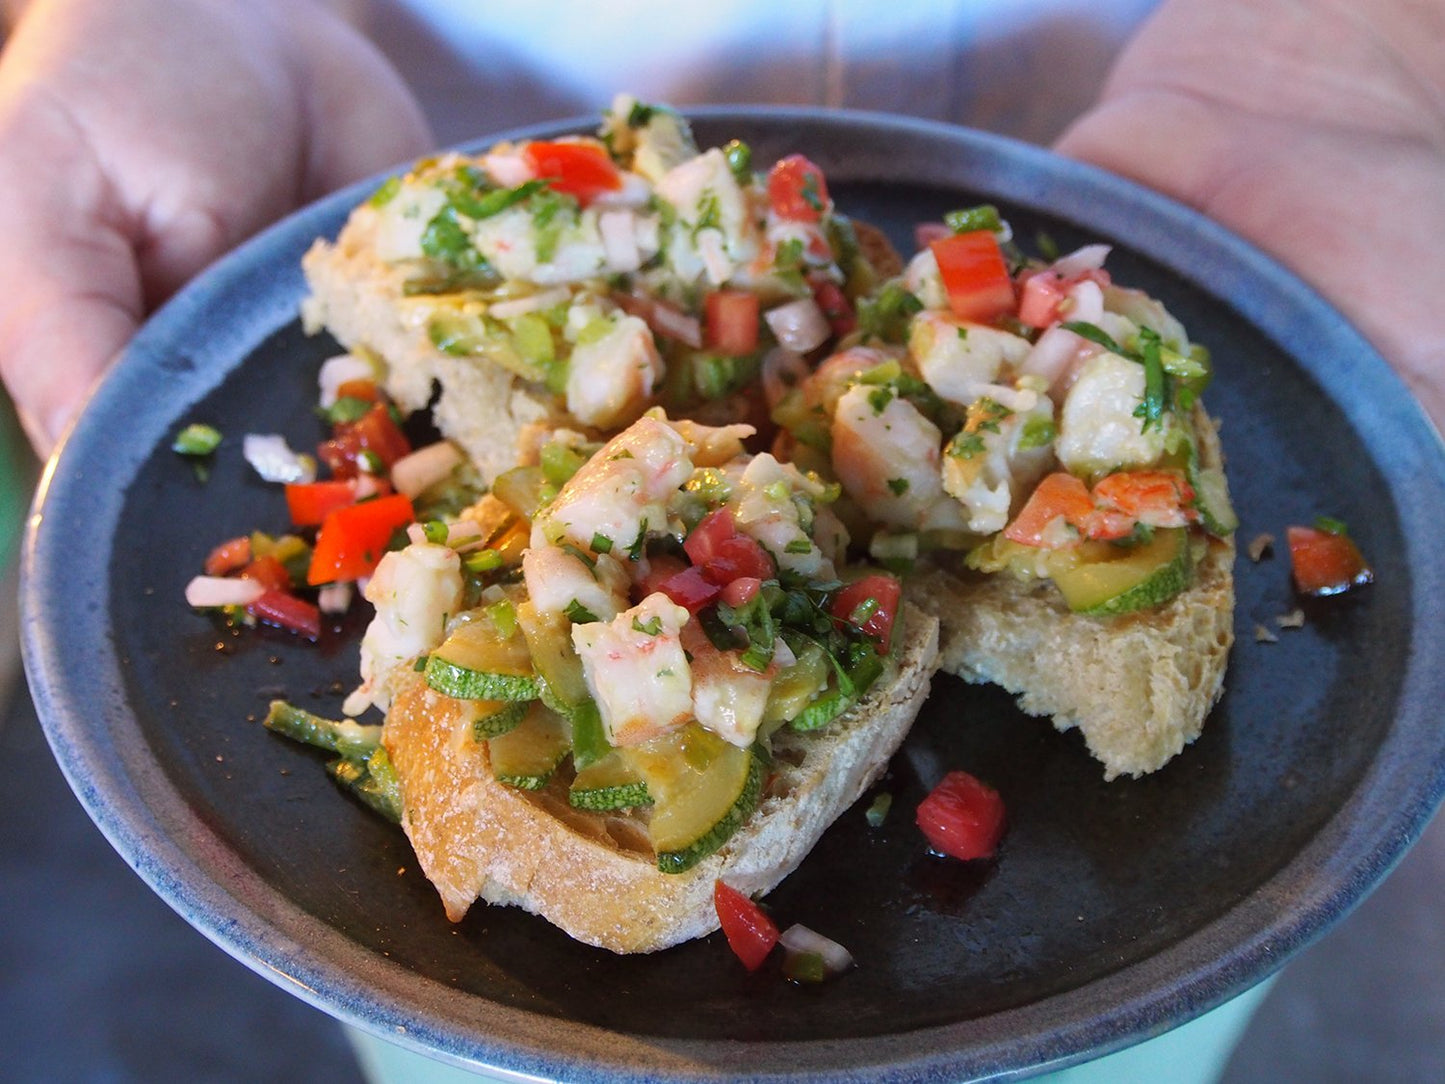 In Mexico: Grilled Shrimp Salad on Toast